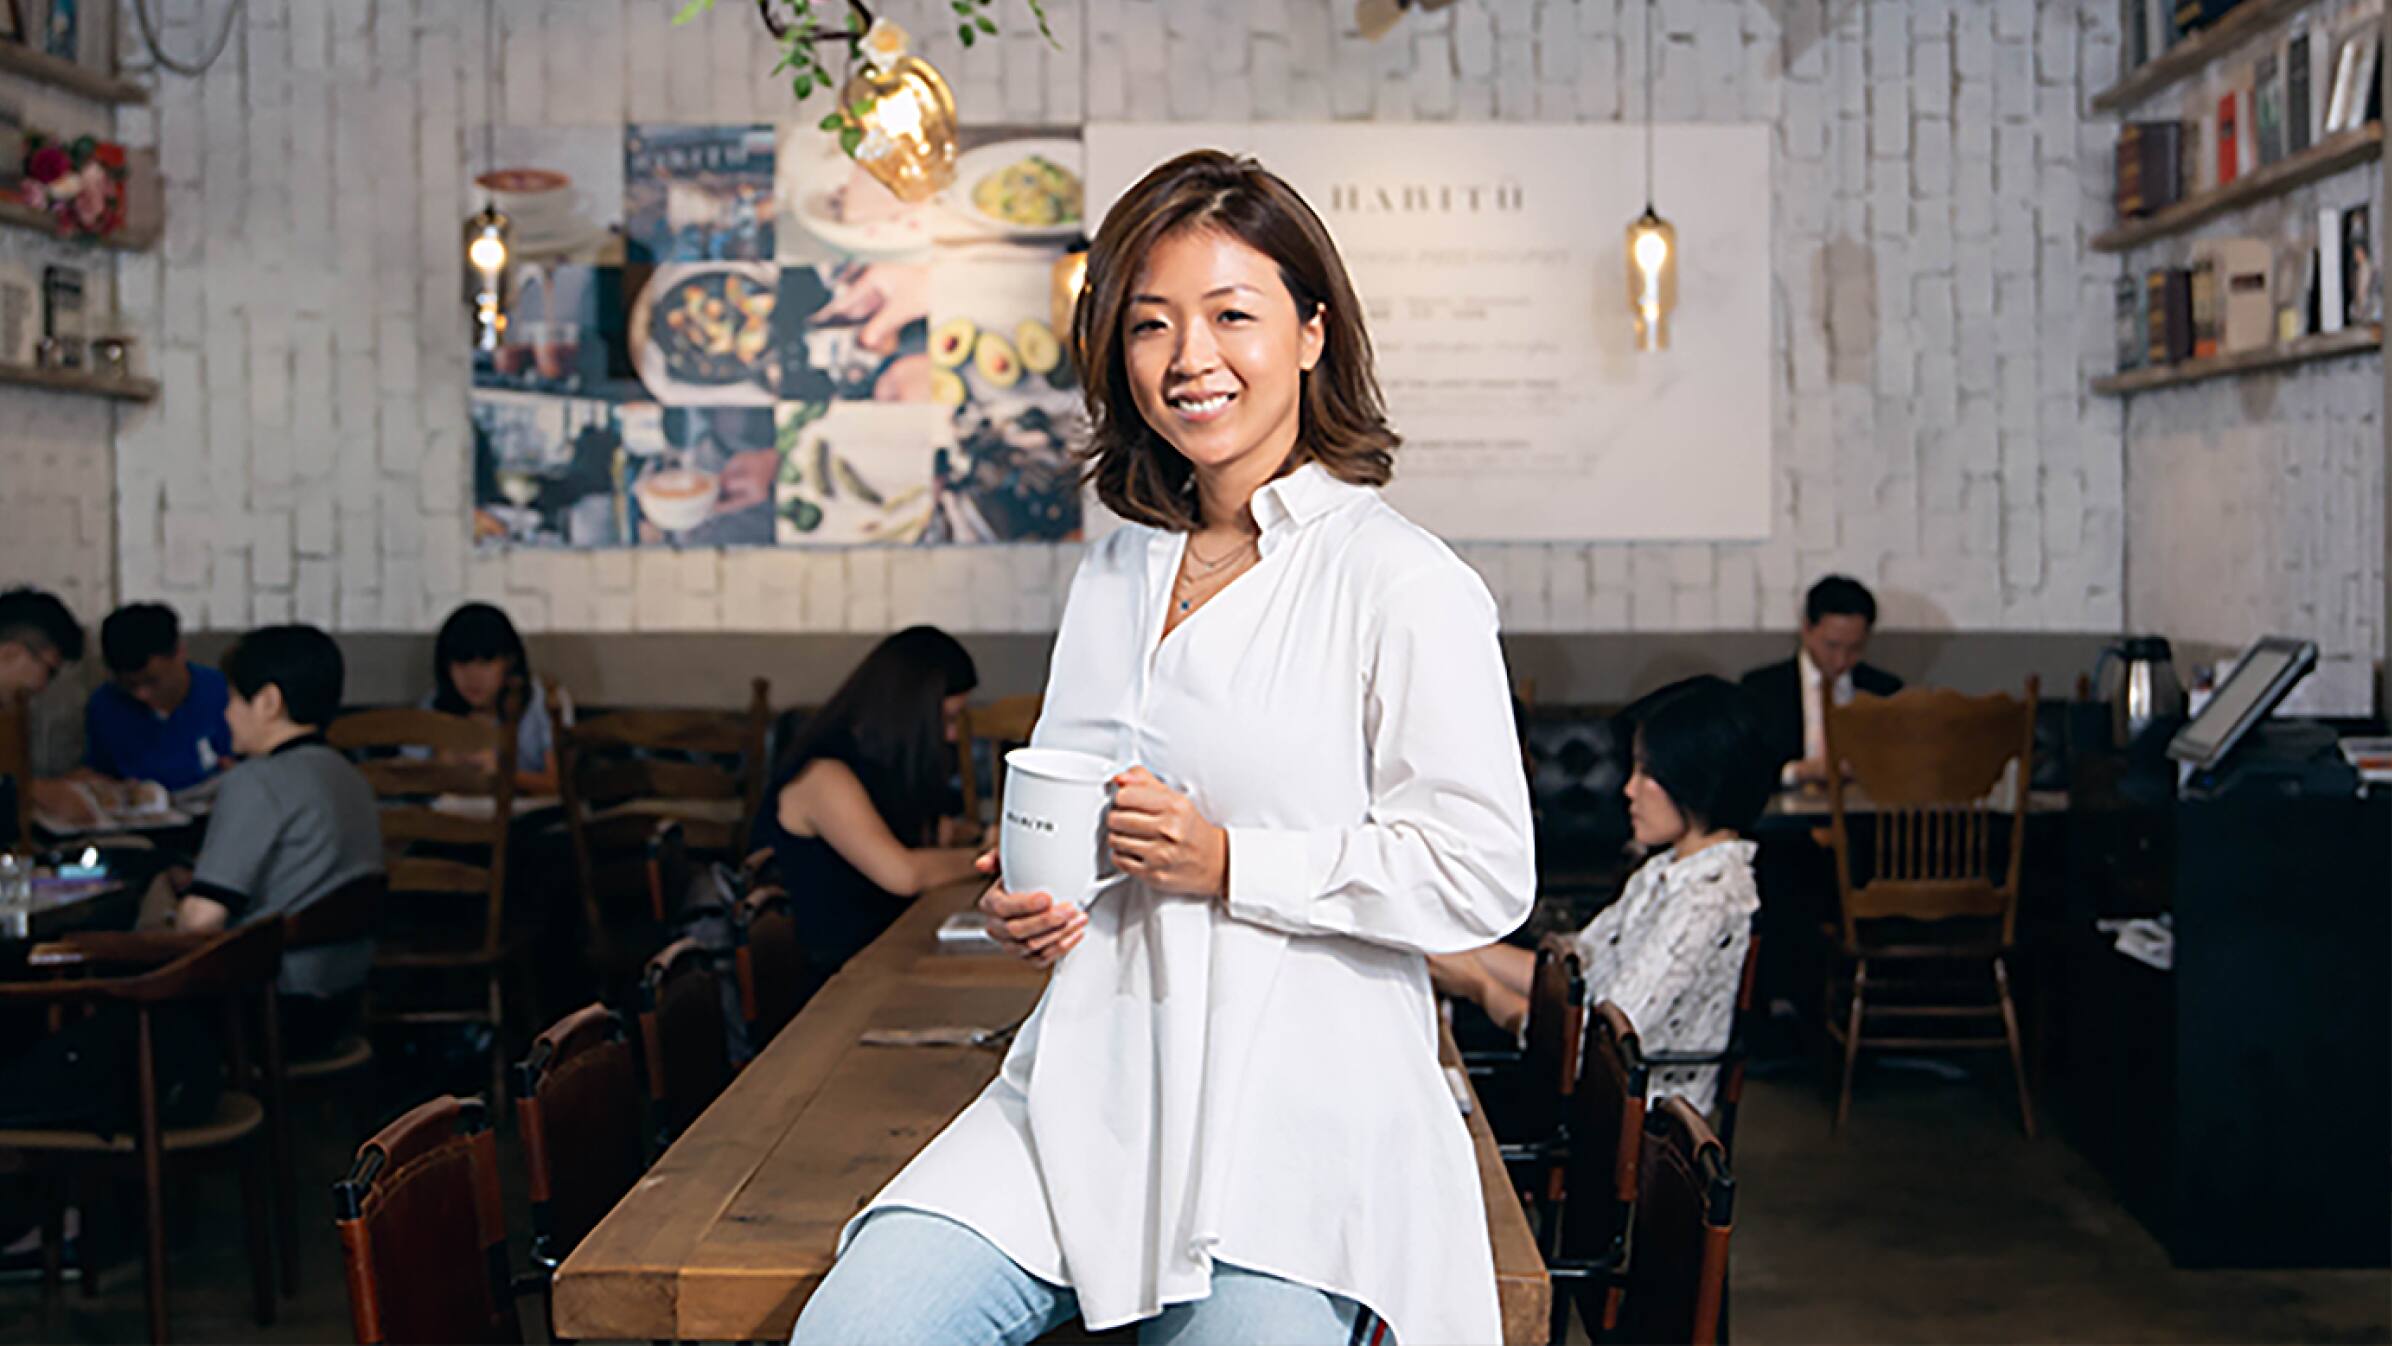 Jennifer Liu leaning against a table holding a cup of coffee inside Habitū Cafe.